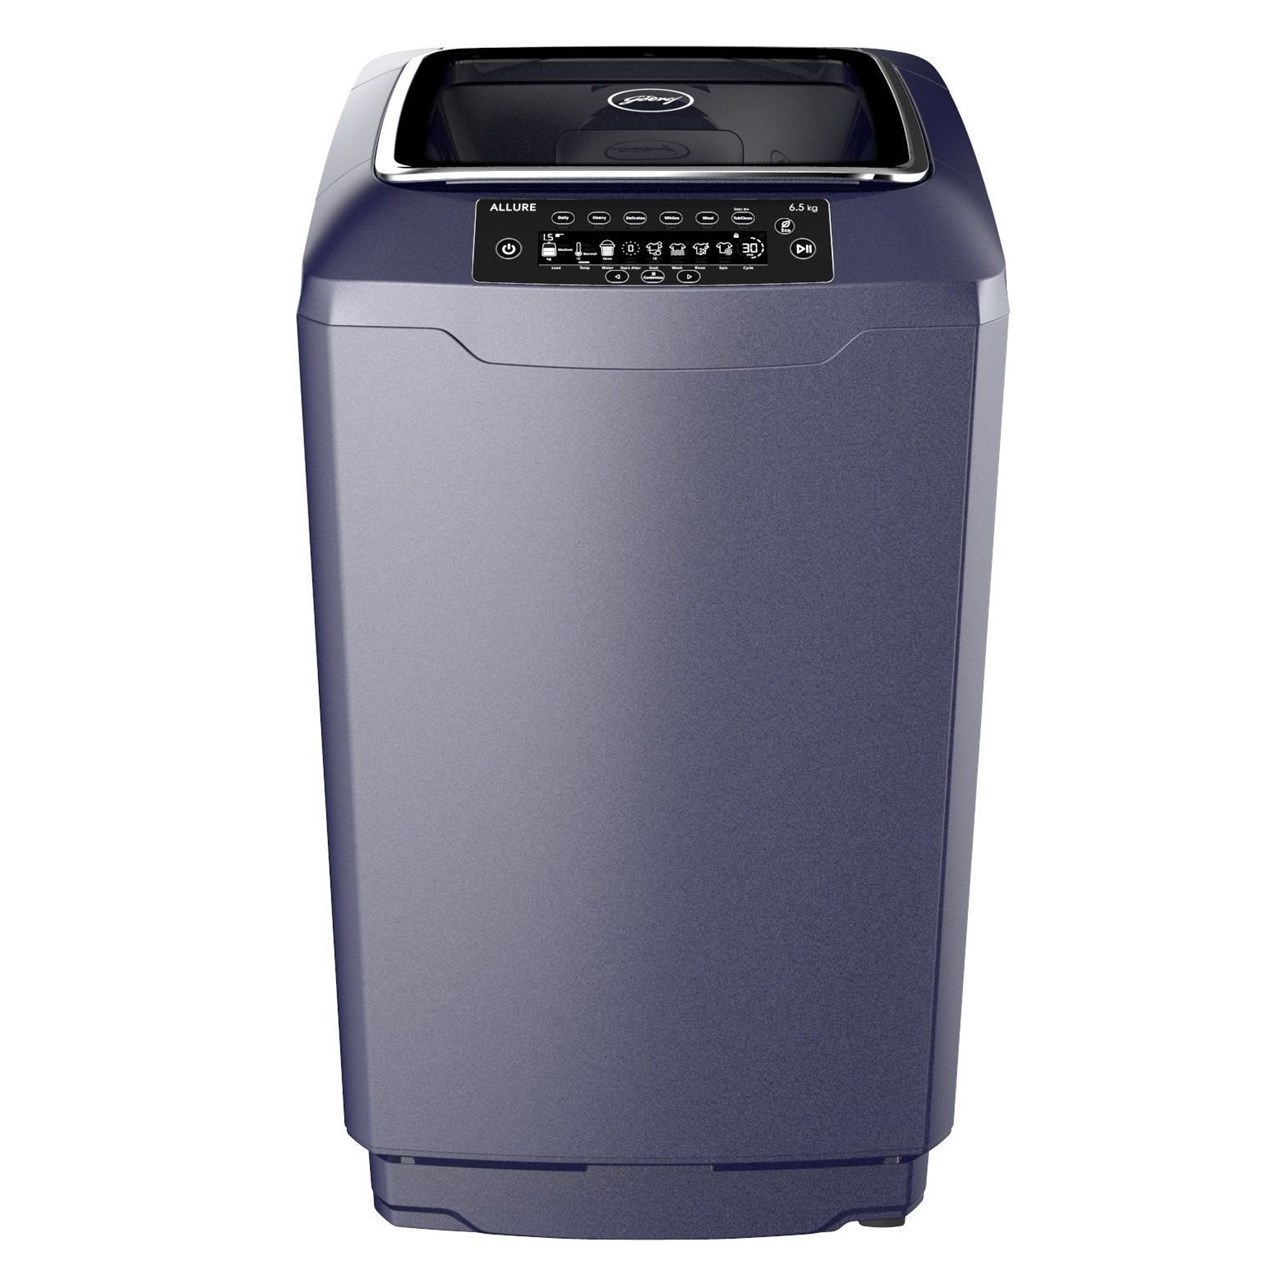 Buy Fully Automatic Washing Machine Online @ Best Prices | SATHYA sathya.in